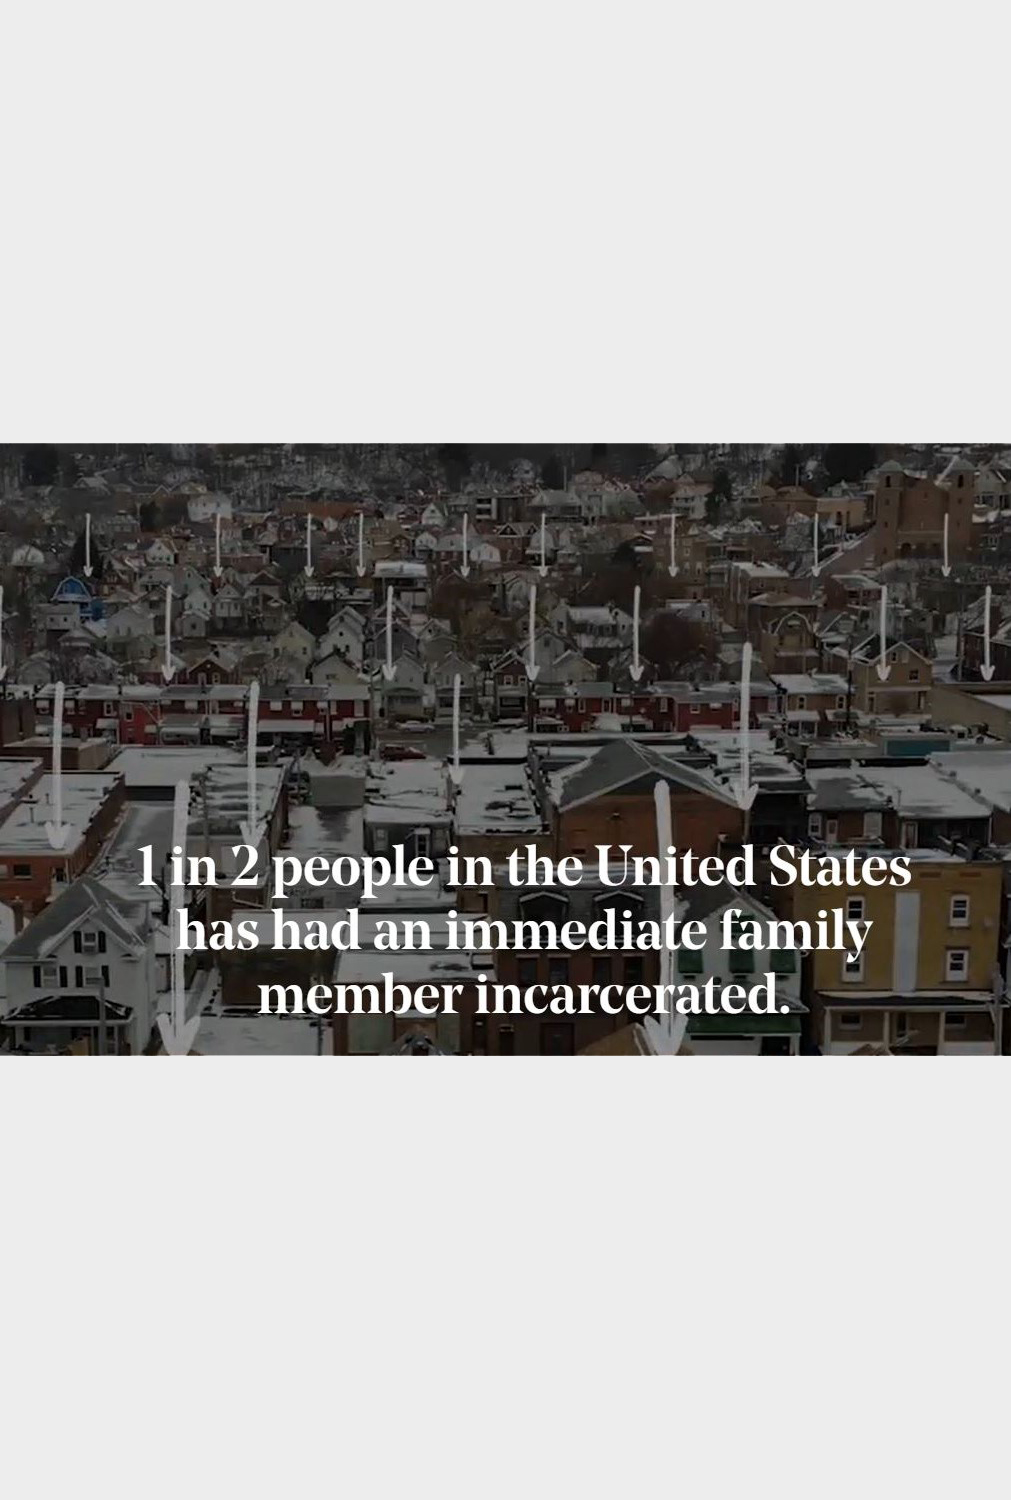 1 in 2 had immediate family incarcerated